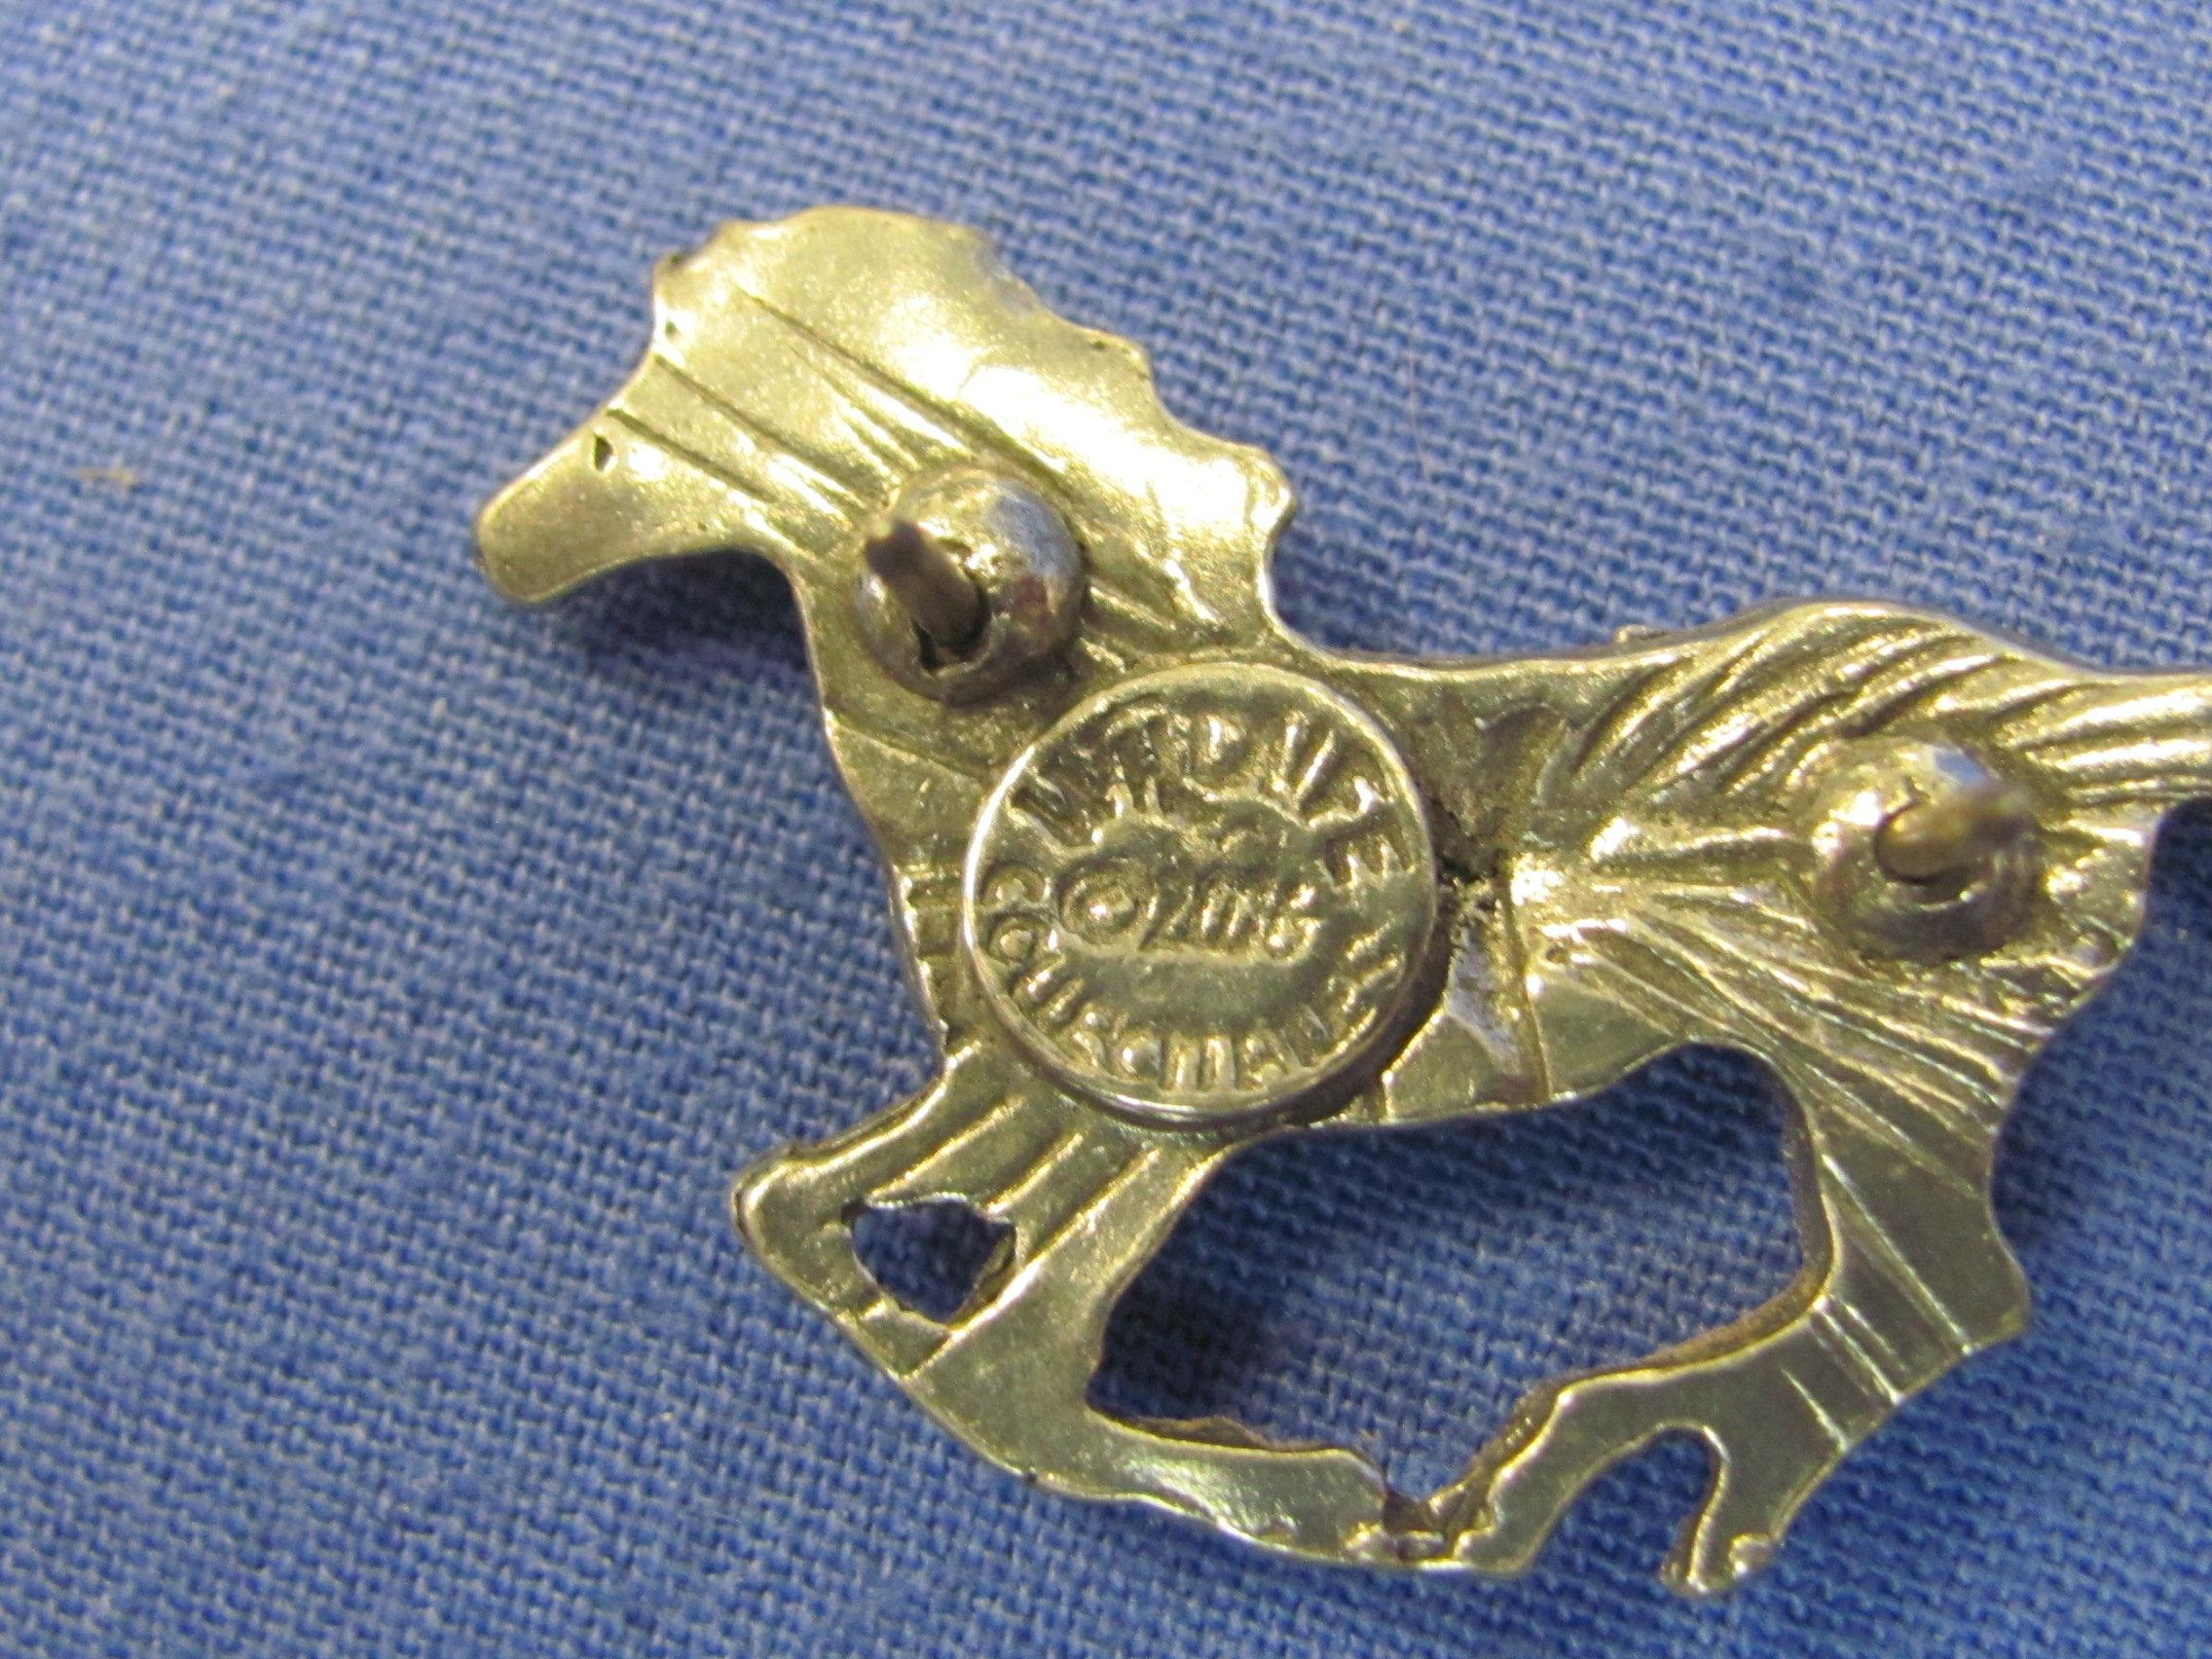 Galloping Horse Tack Pin – Silvertone Metal, maybe Pewter – by Wildlife Collections – 1 7/8” wide